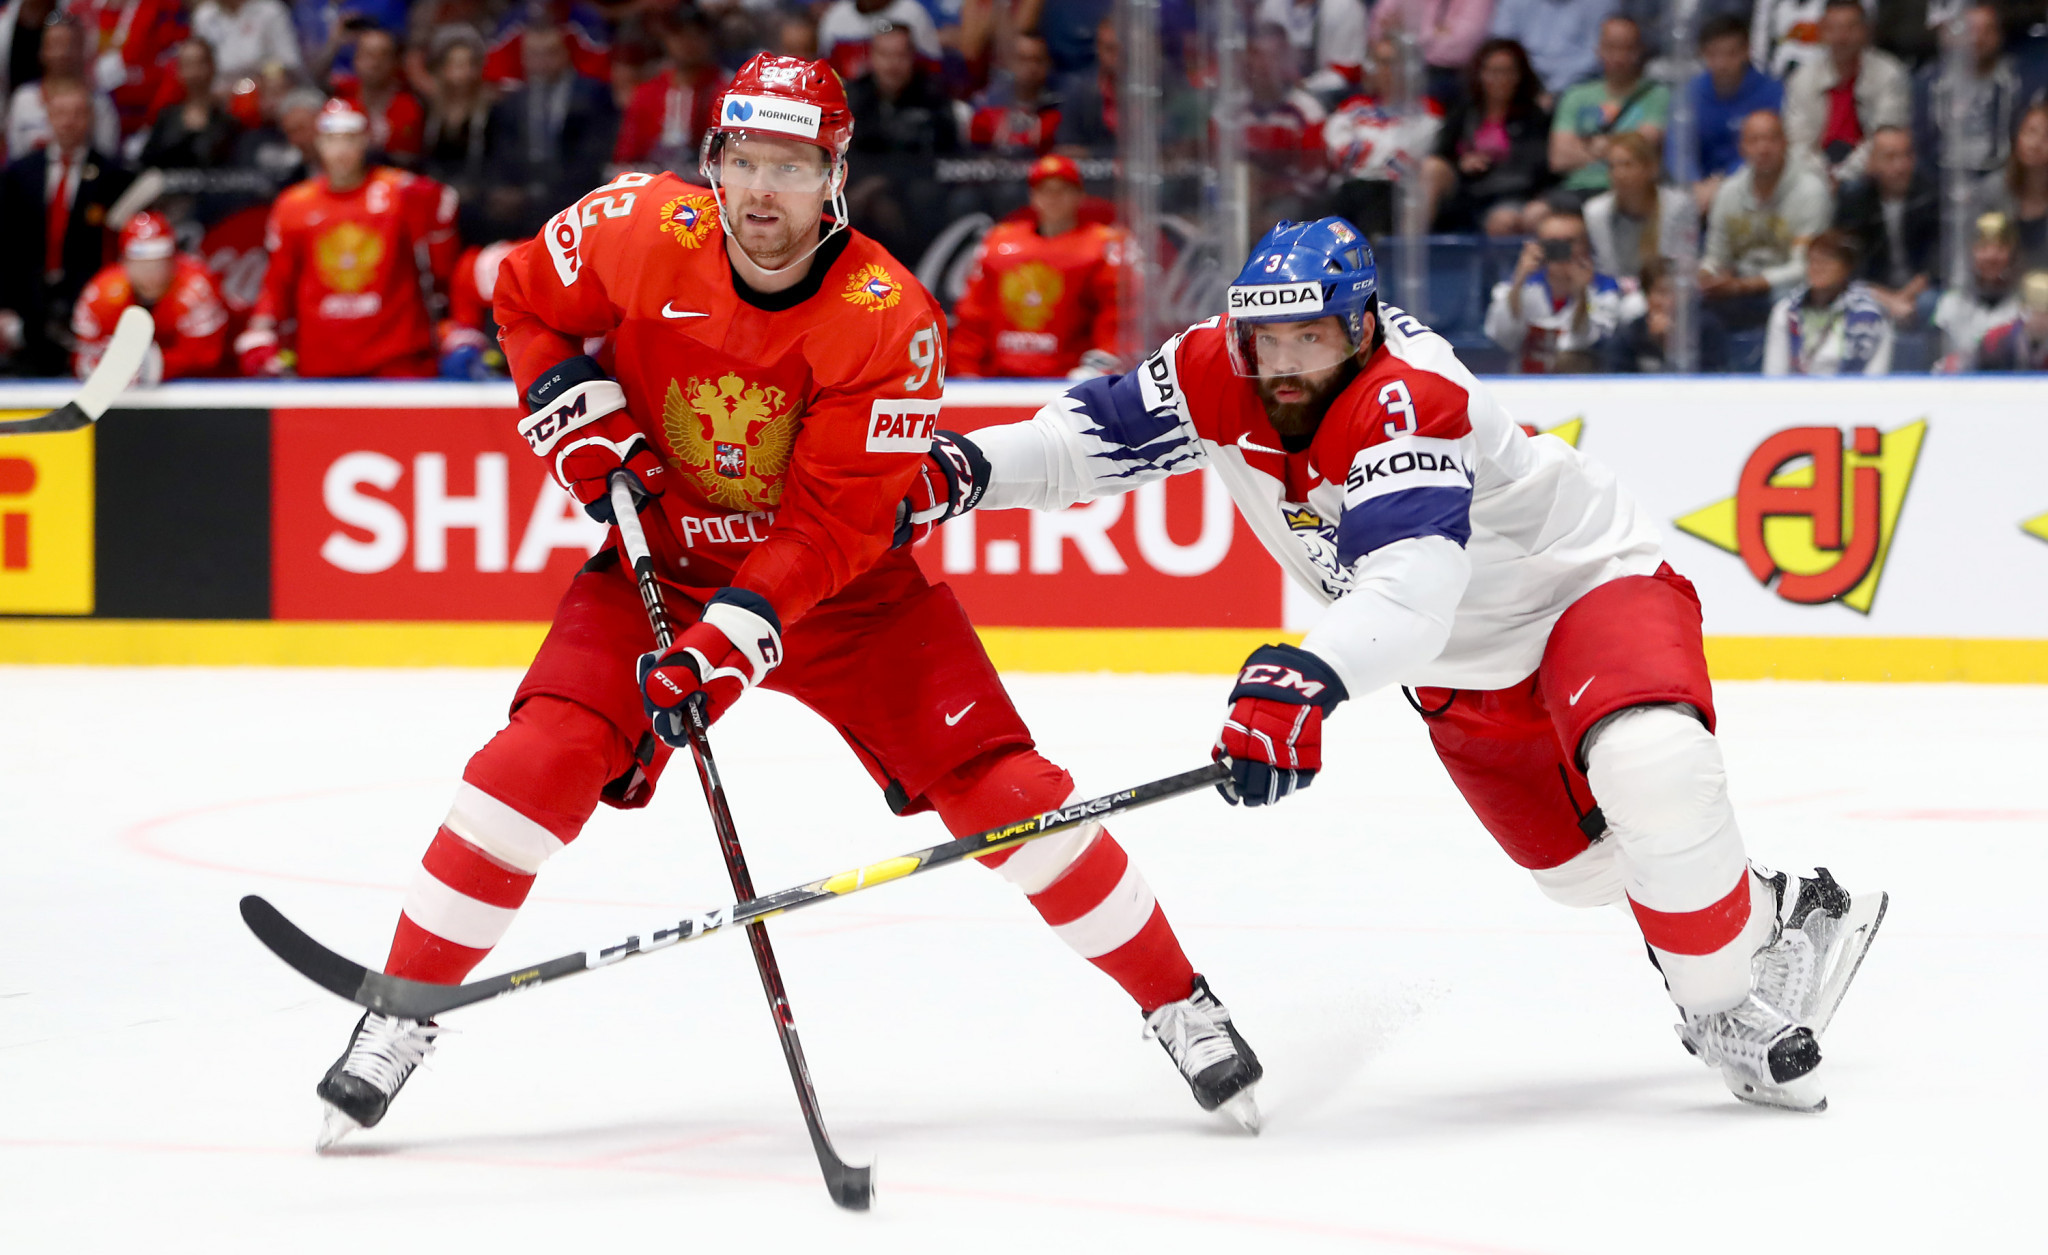 Evgeny Kuznetsov, left, tested positive after helping Russia beat Czech Republic in the bronze medal match at the World Championship in Slovakia ©Getty Images